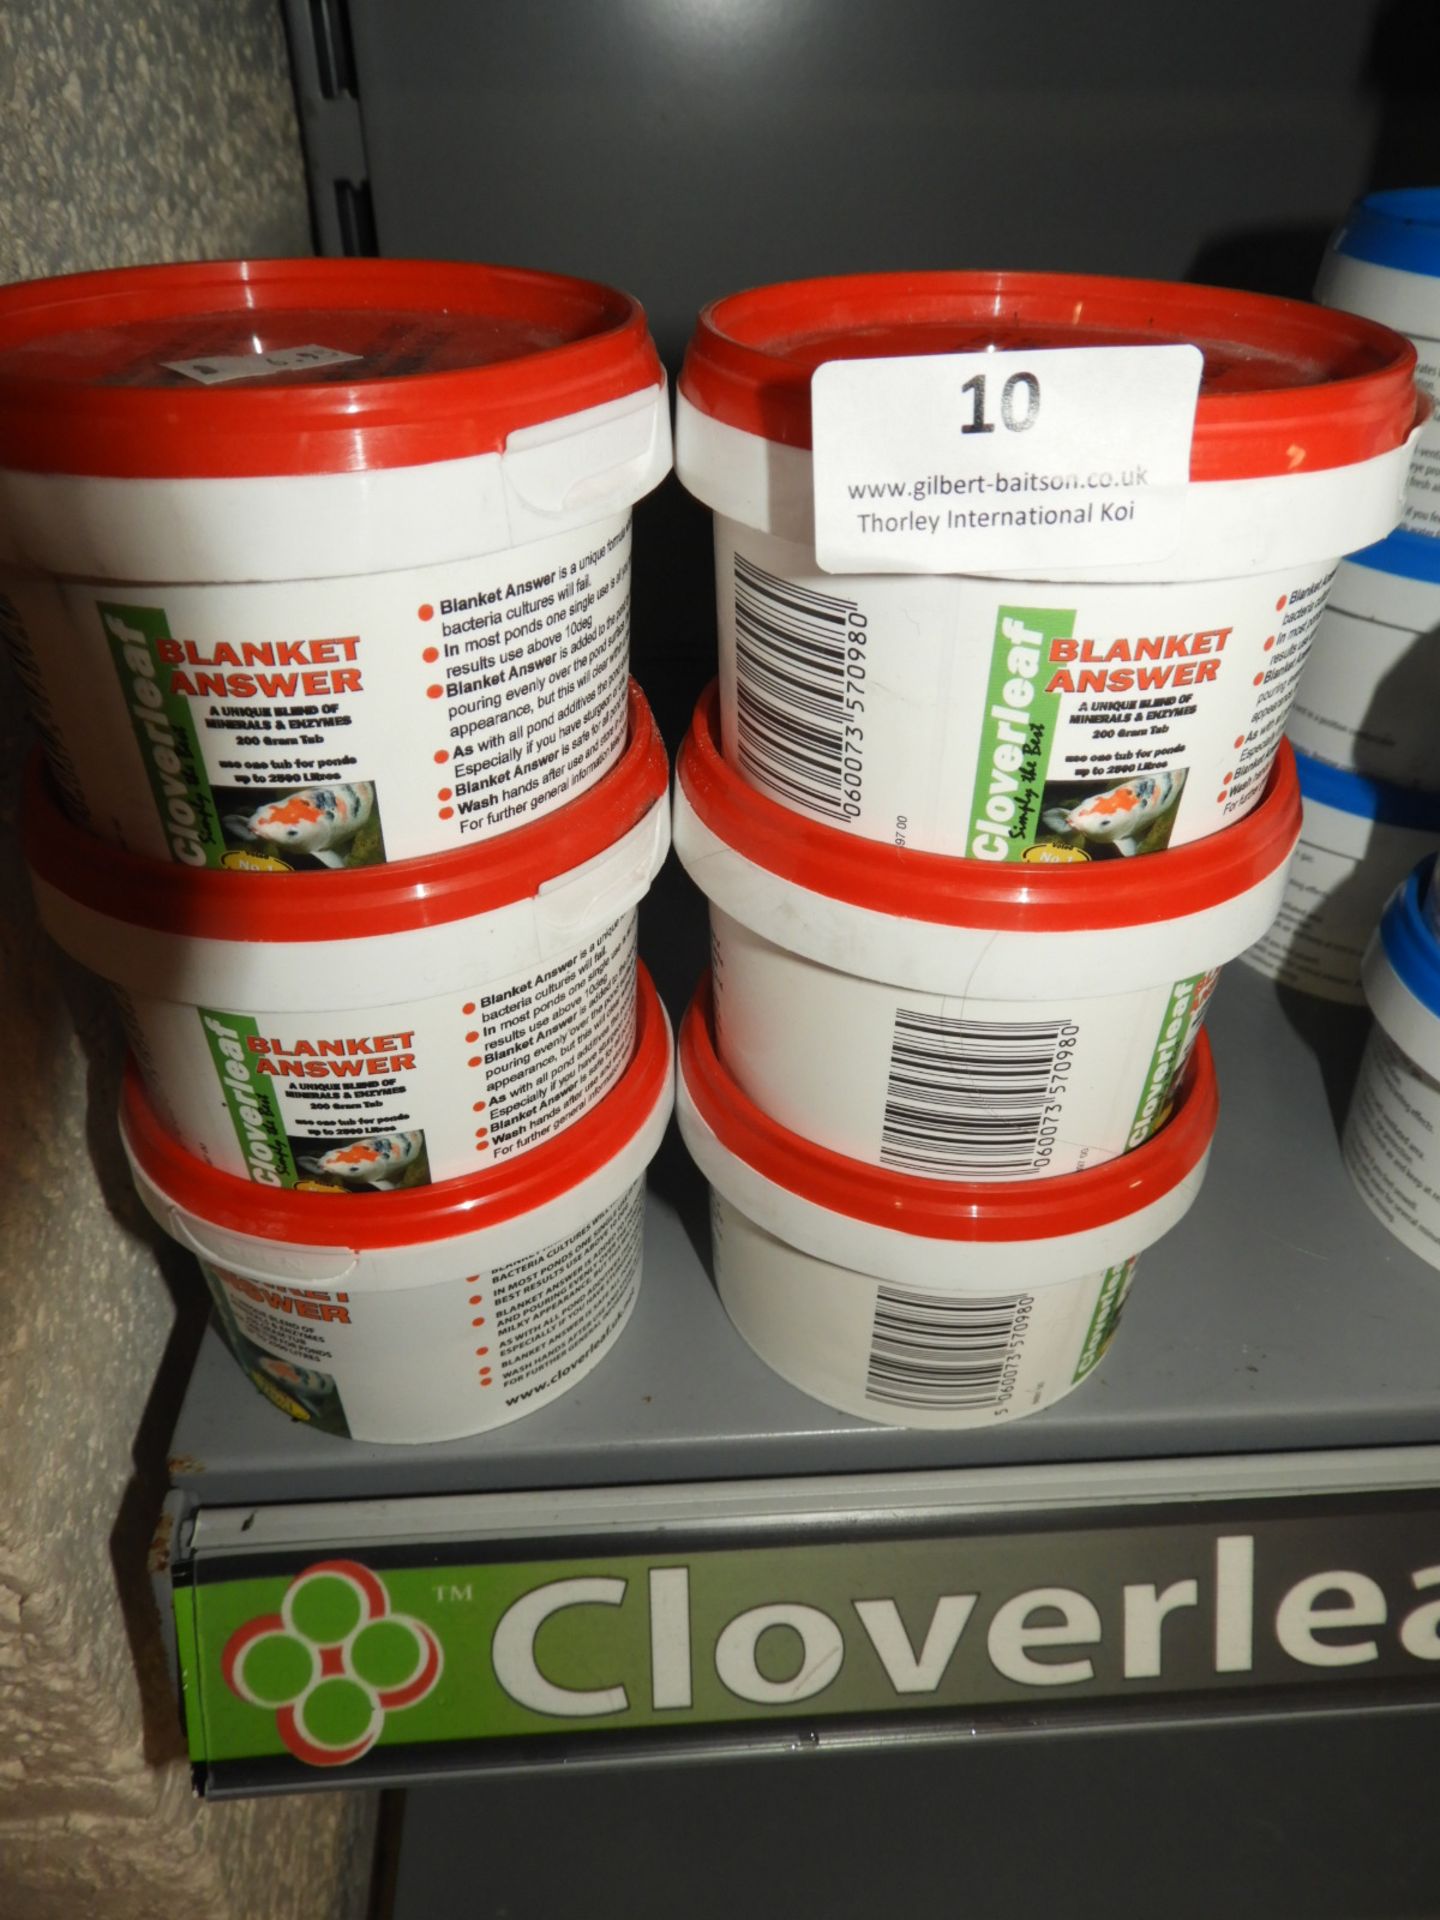 Six Containers of Cloverleaf Blanket Answer (to treat up to 2500L)